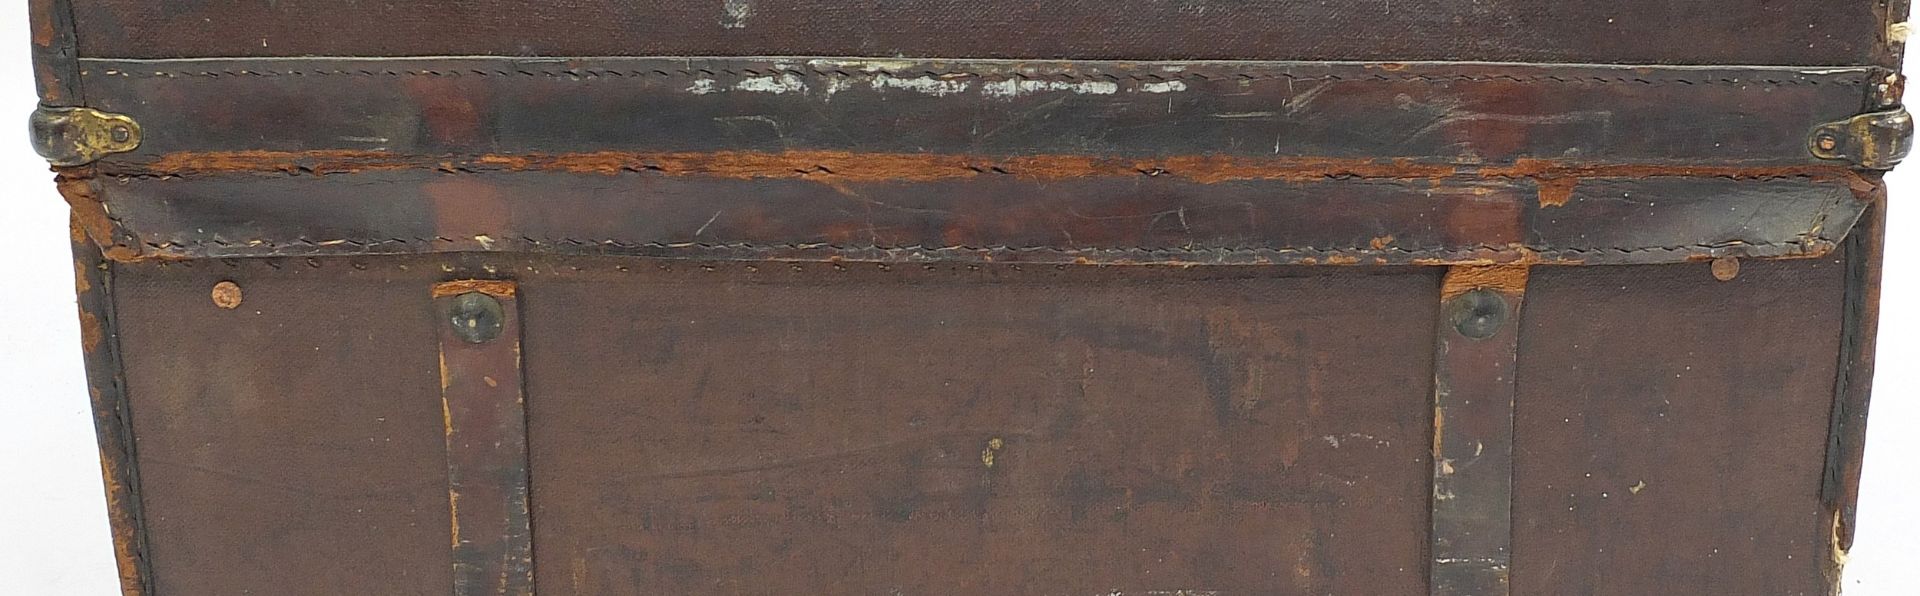 Drew & Sons, vintage brown leather trunk with remnants of shipping labels and initials A.C.W, 34.5c - Image 6 of 7